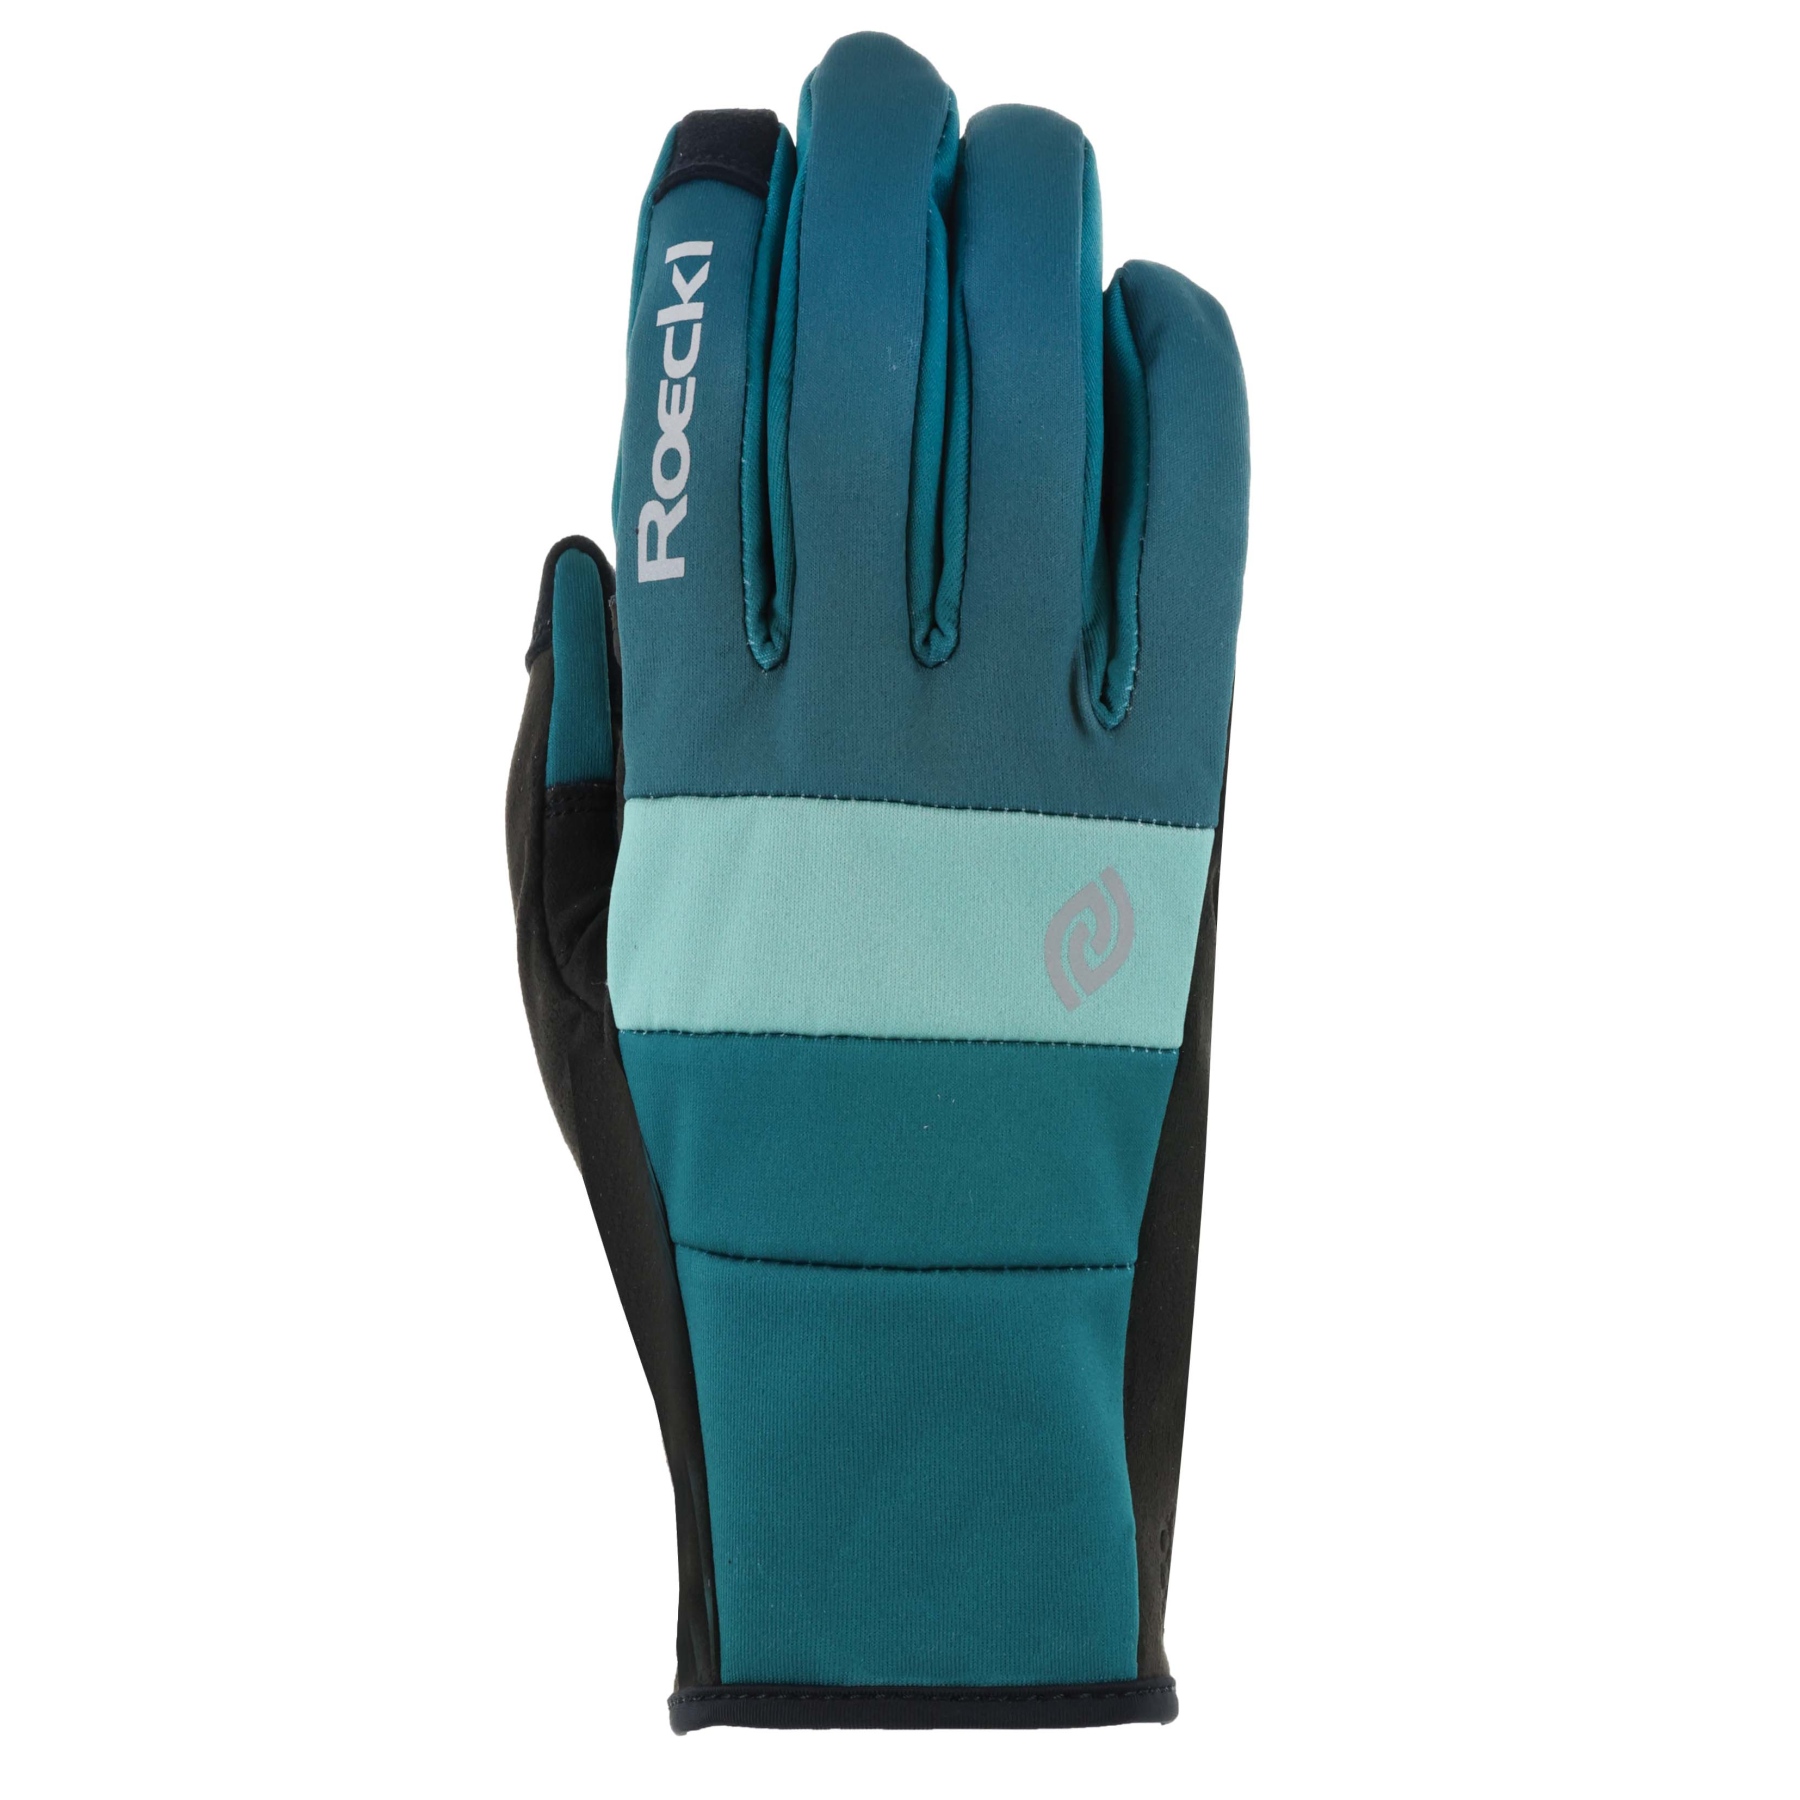 Picture of Roeckl Sports Rainau Cycling Gloves - dark forest 6710